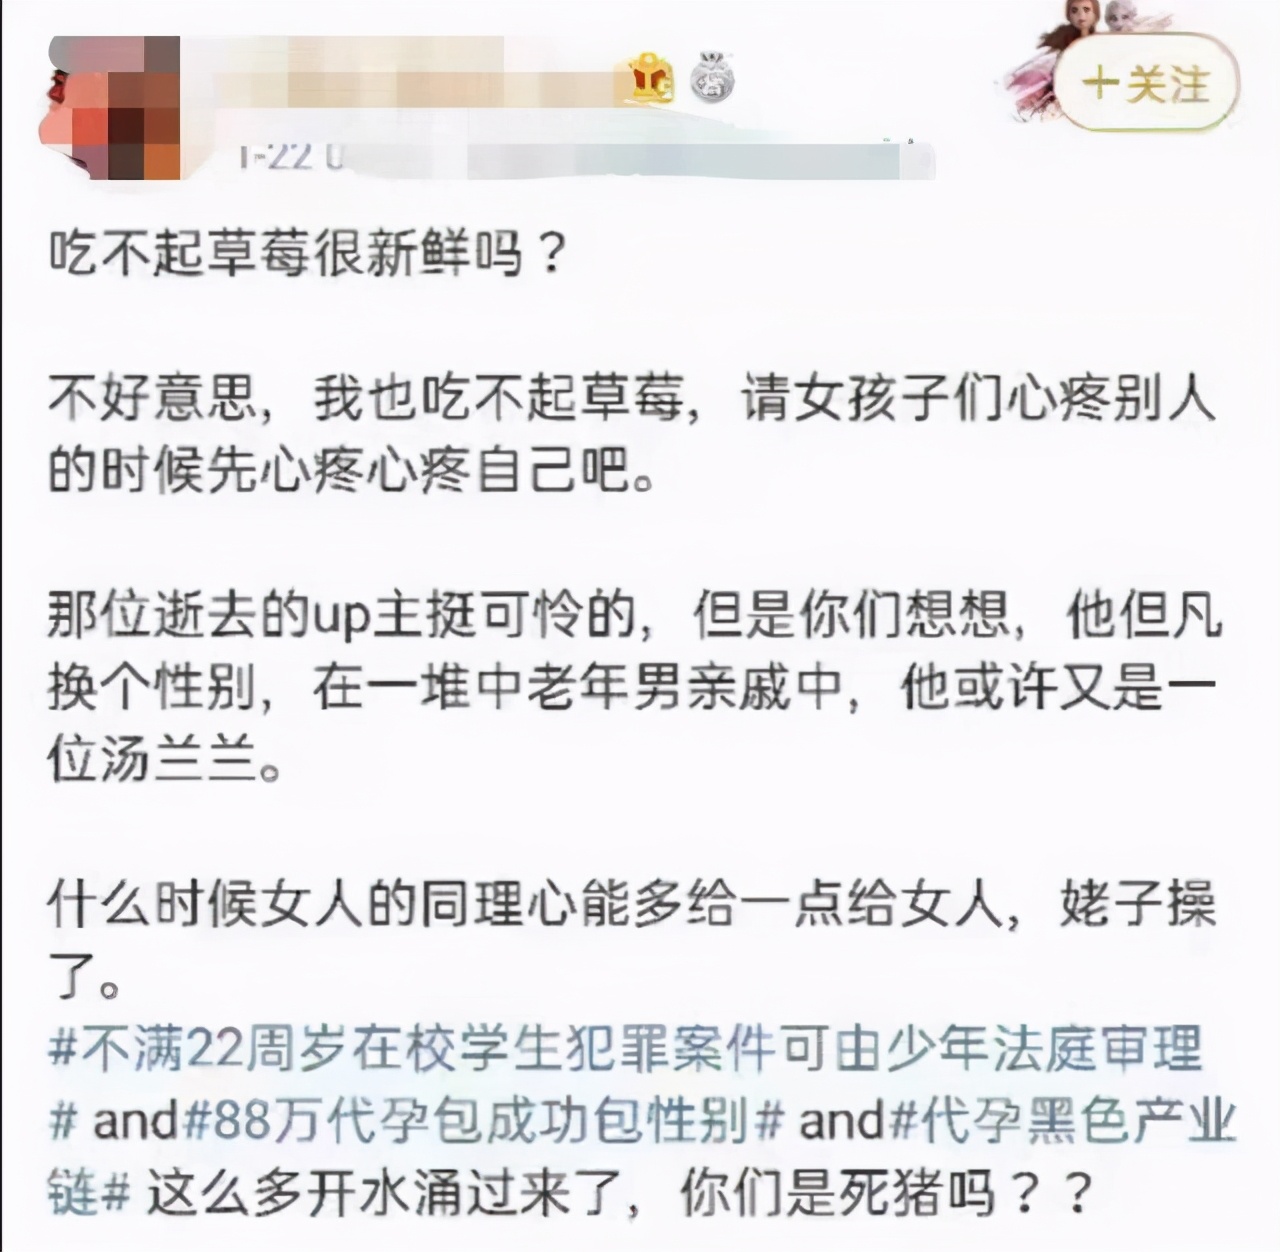 B station is young UP advocate Chinese ink tea dies, distress during see comment region opinion on public affairs, anger letting a person unceasingly